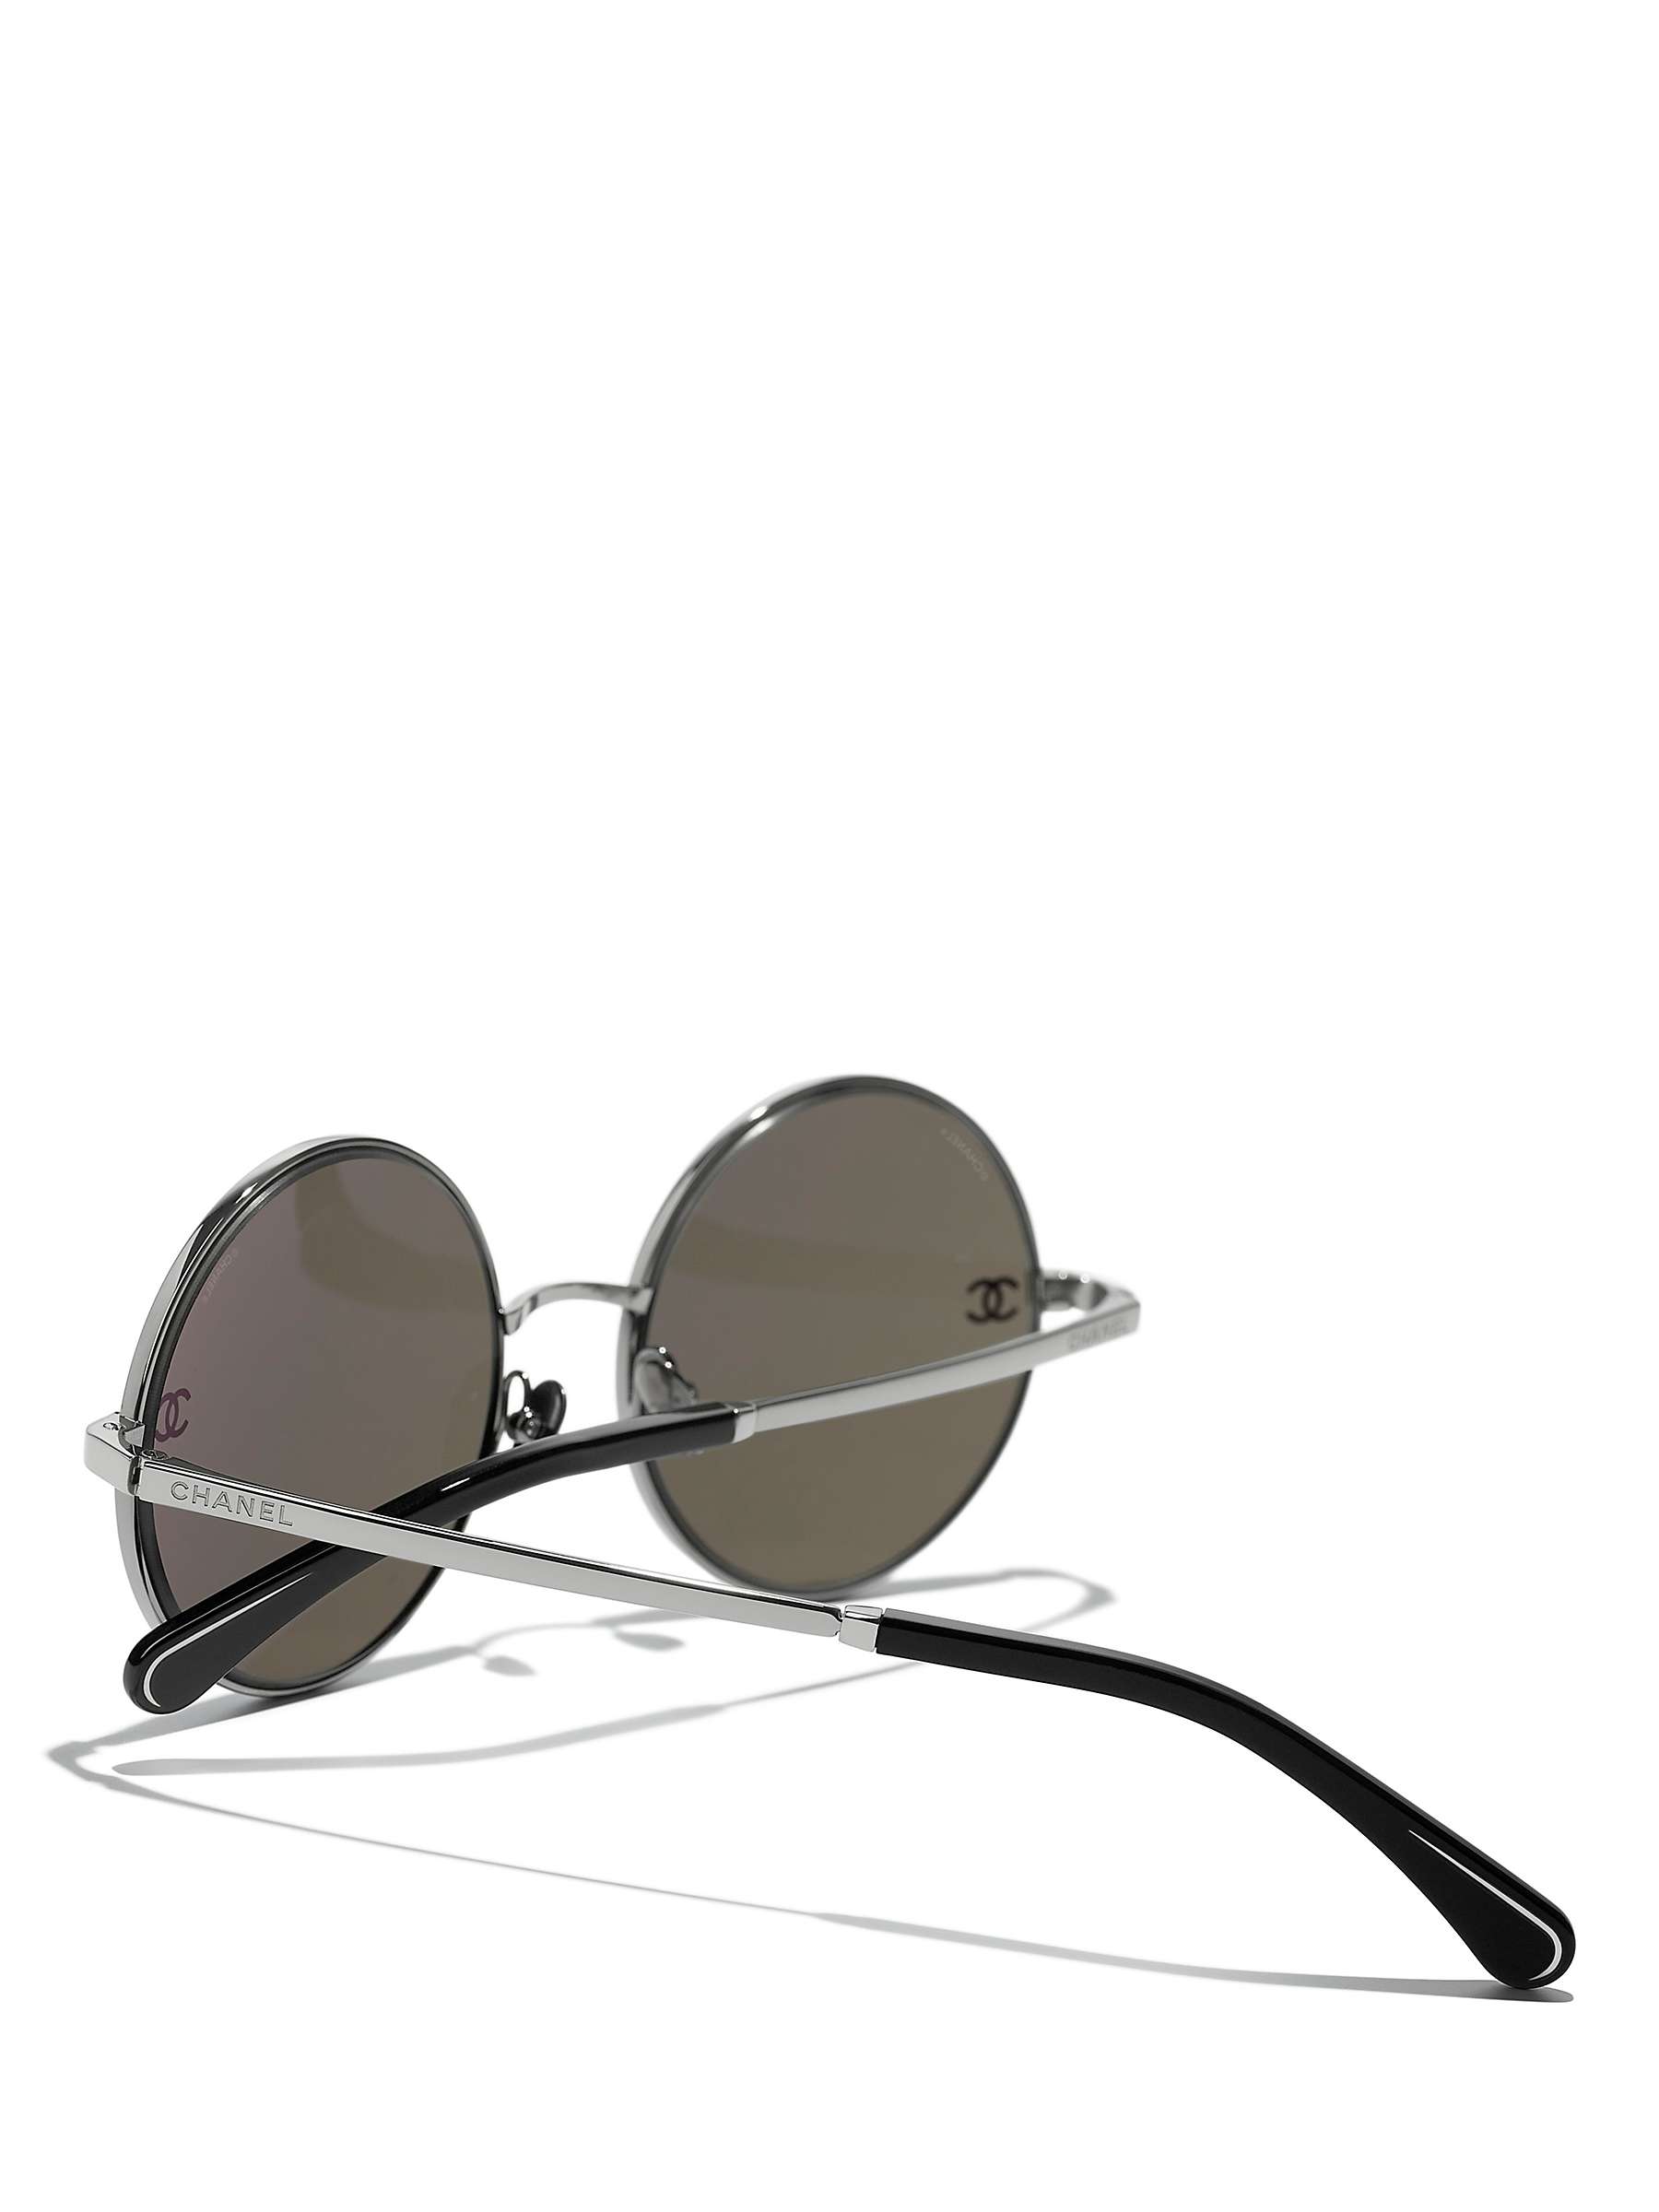 Buy CHANEL Round Sunglasses CH4268 Shiny Gunmetal/Brown Online at johnlewis.com